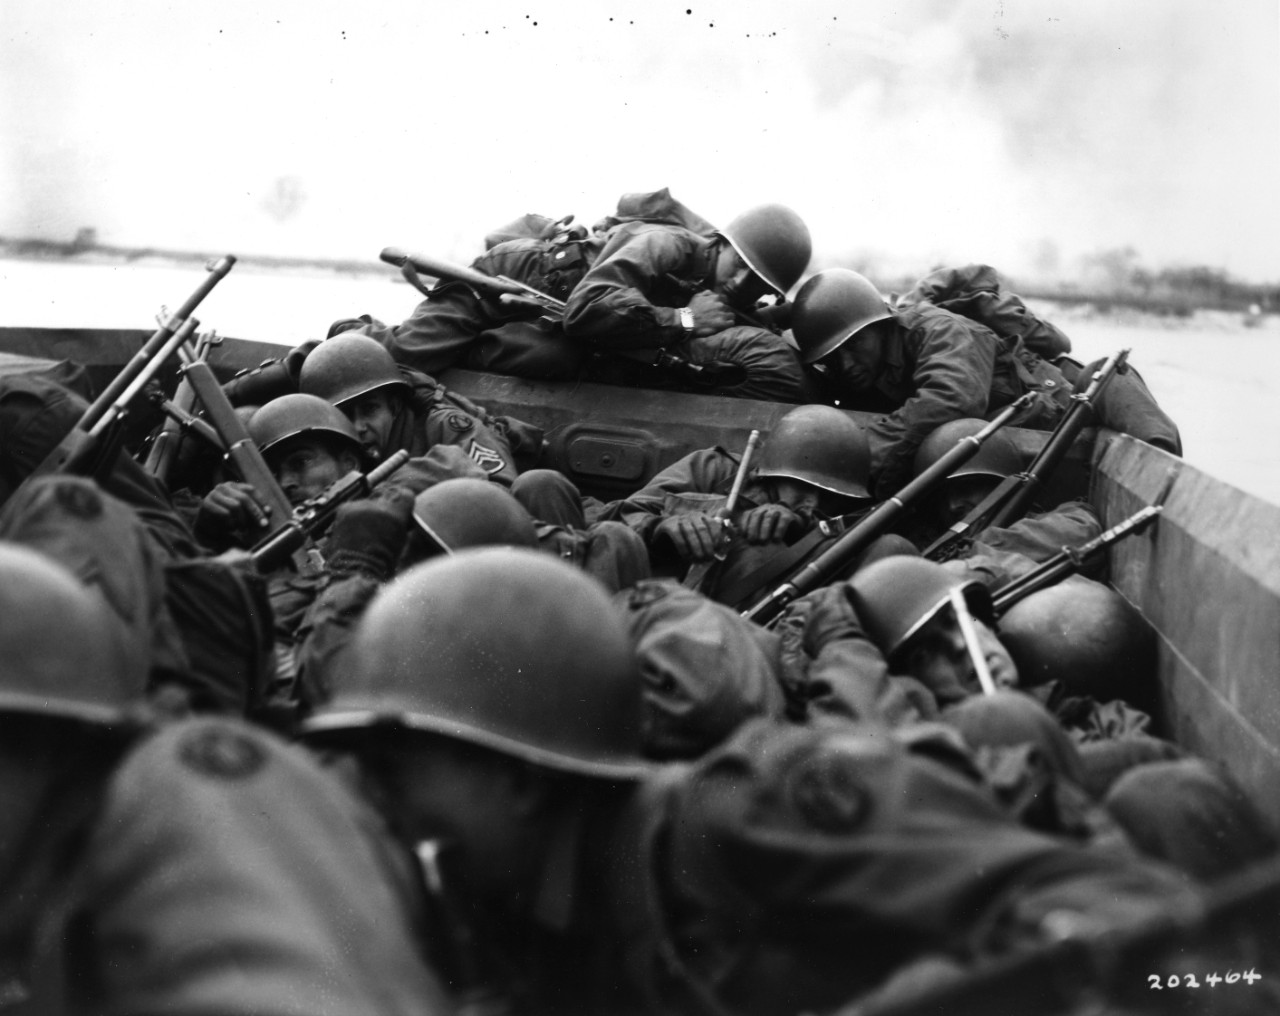 <p>89th Division soldiers crouch low in their crowded assault boat, to escape enemy fire as they cross the Rhine River at Oberwesel, Germany, 26 March 1945. Note 89th Division insignia on men's shoulders, and variety of weapons (including M-1 rifles, Thompson submachine gun, and a Browning Automatic Rifle).</p>